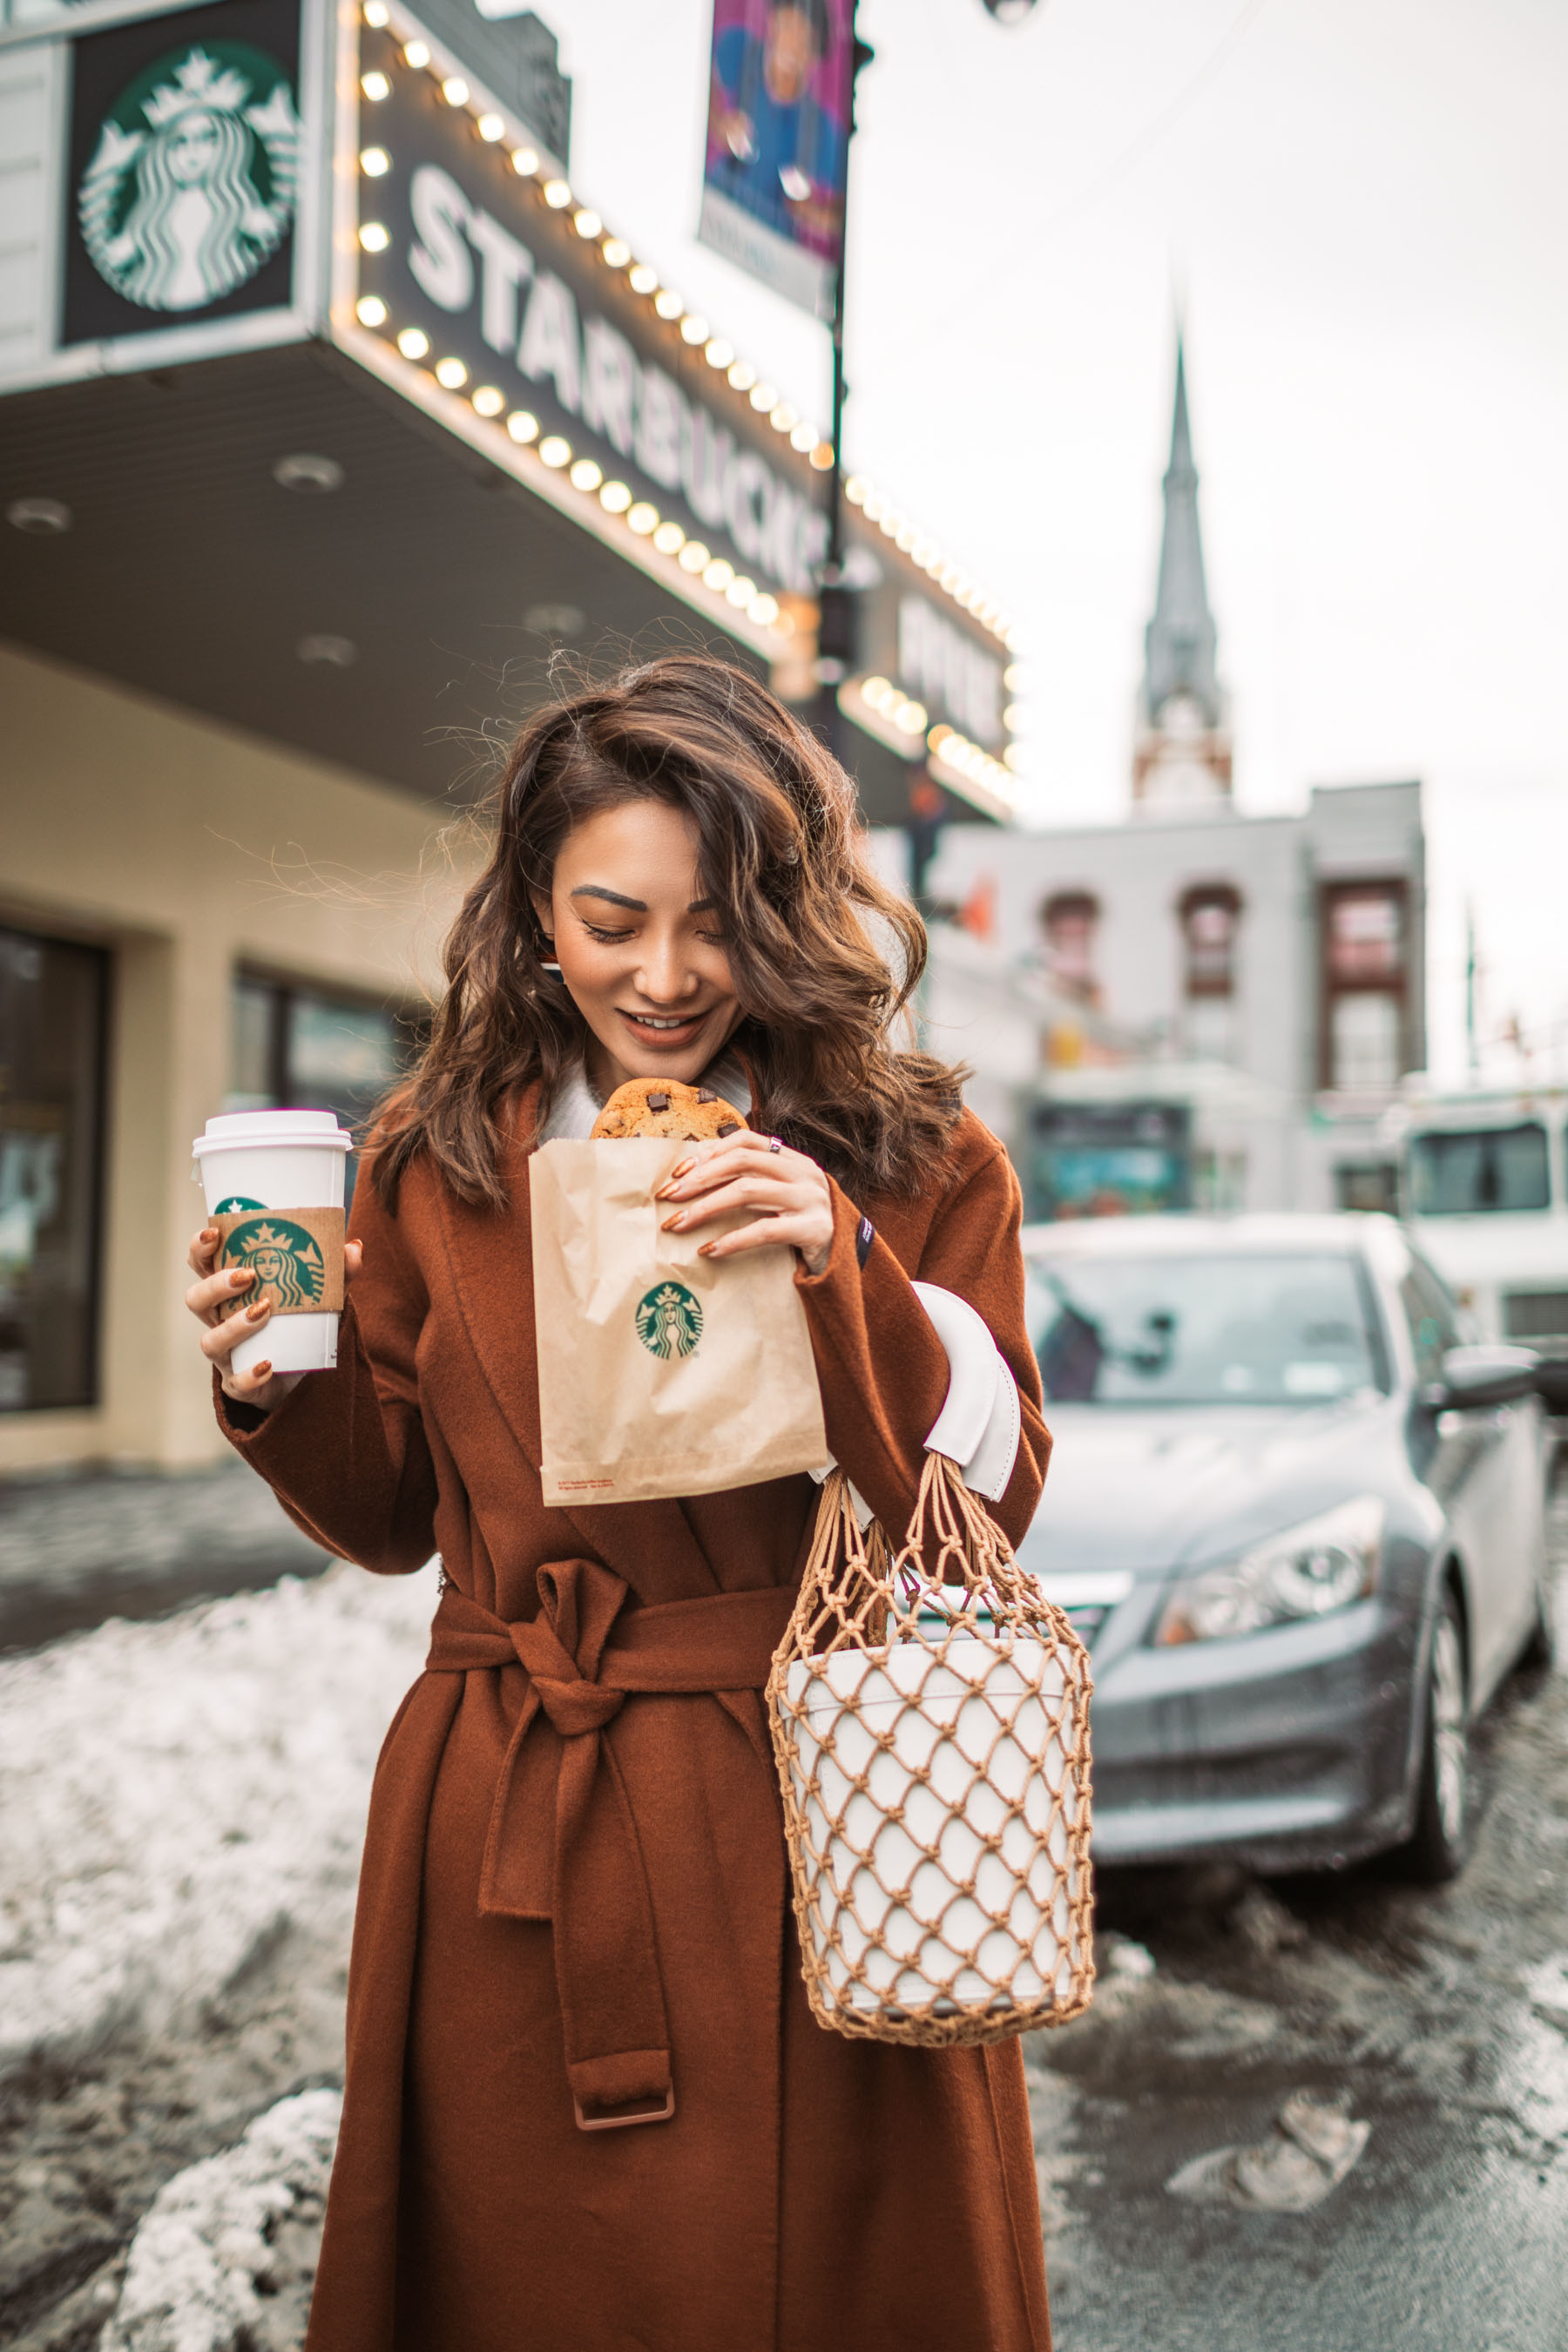 Instagram Outfits Round Up // Notjessfashion.com // Cozy Layered looks, brown robe coat, wrap coat, fishnet bag, net bag, lifestyle portrait, new york fashion blogger, asian blogger, fashion blogger, ootd, jessica wang, cozy winter looks